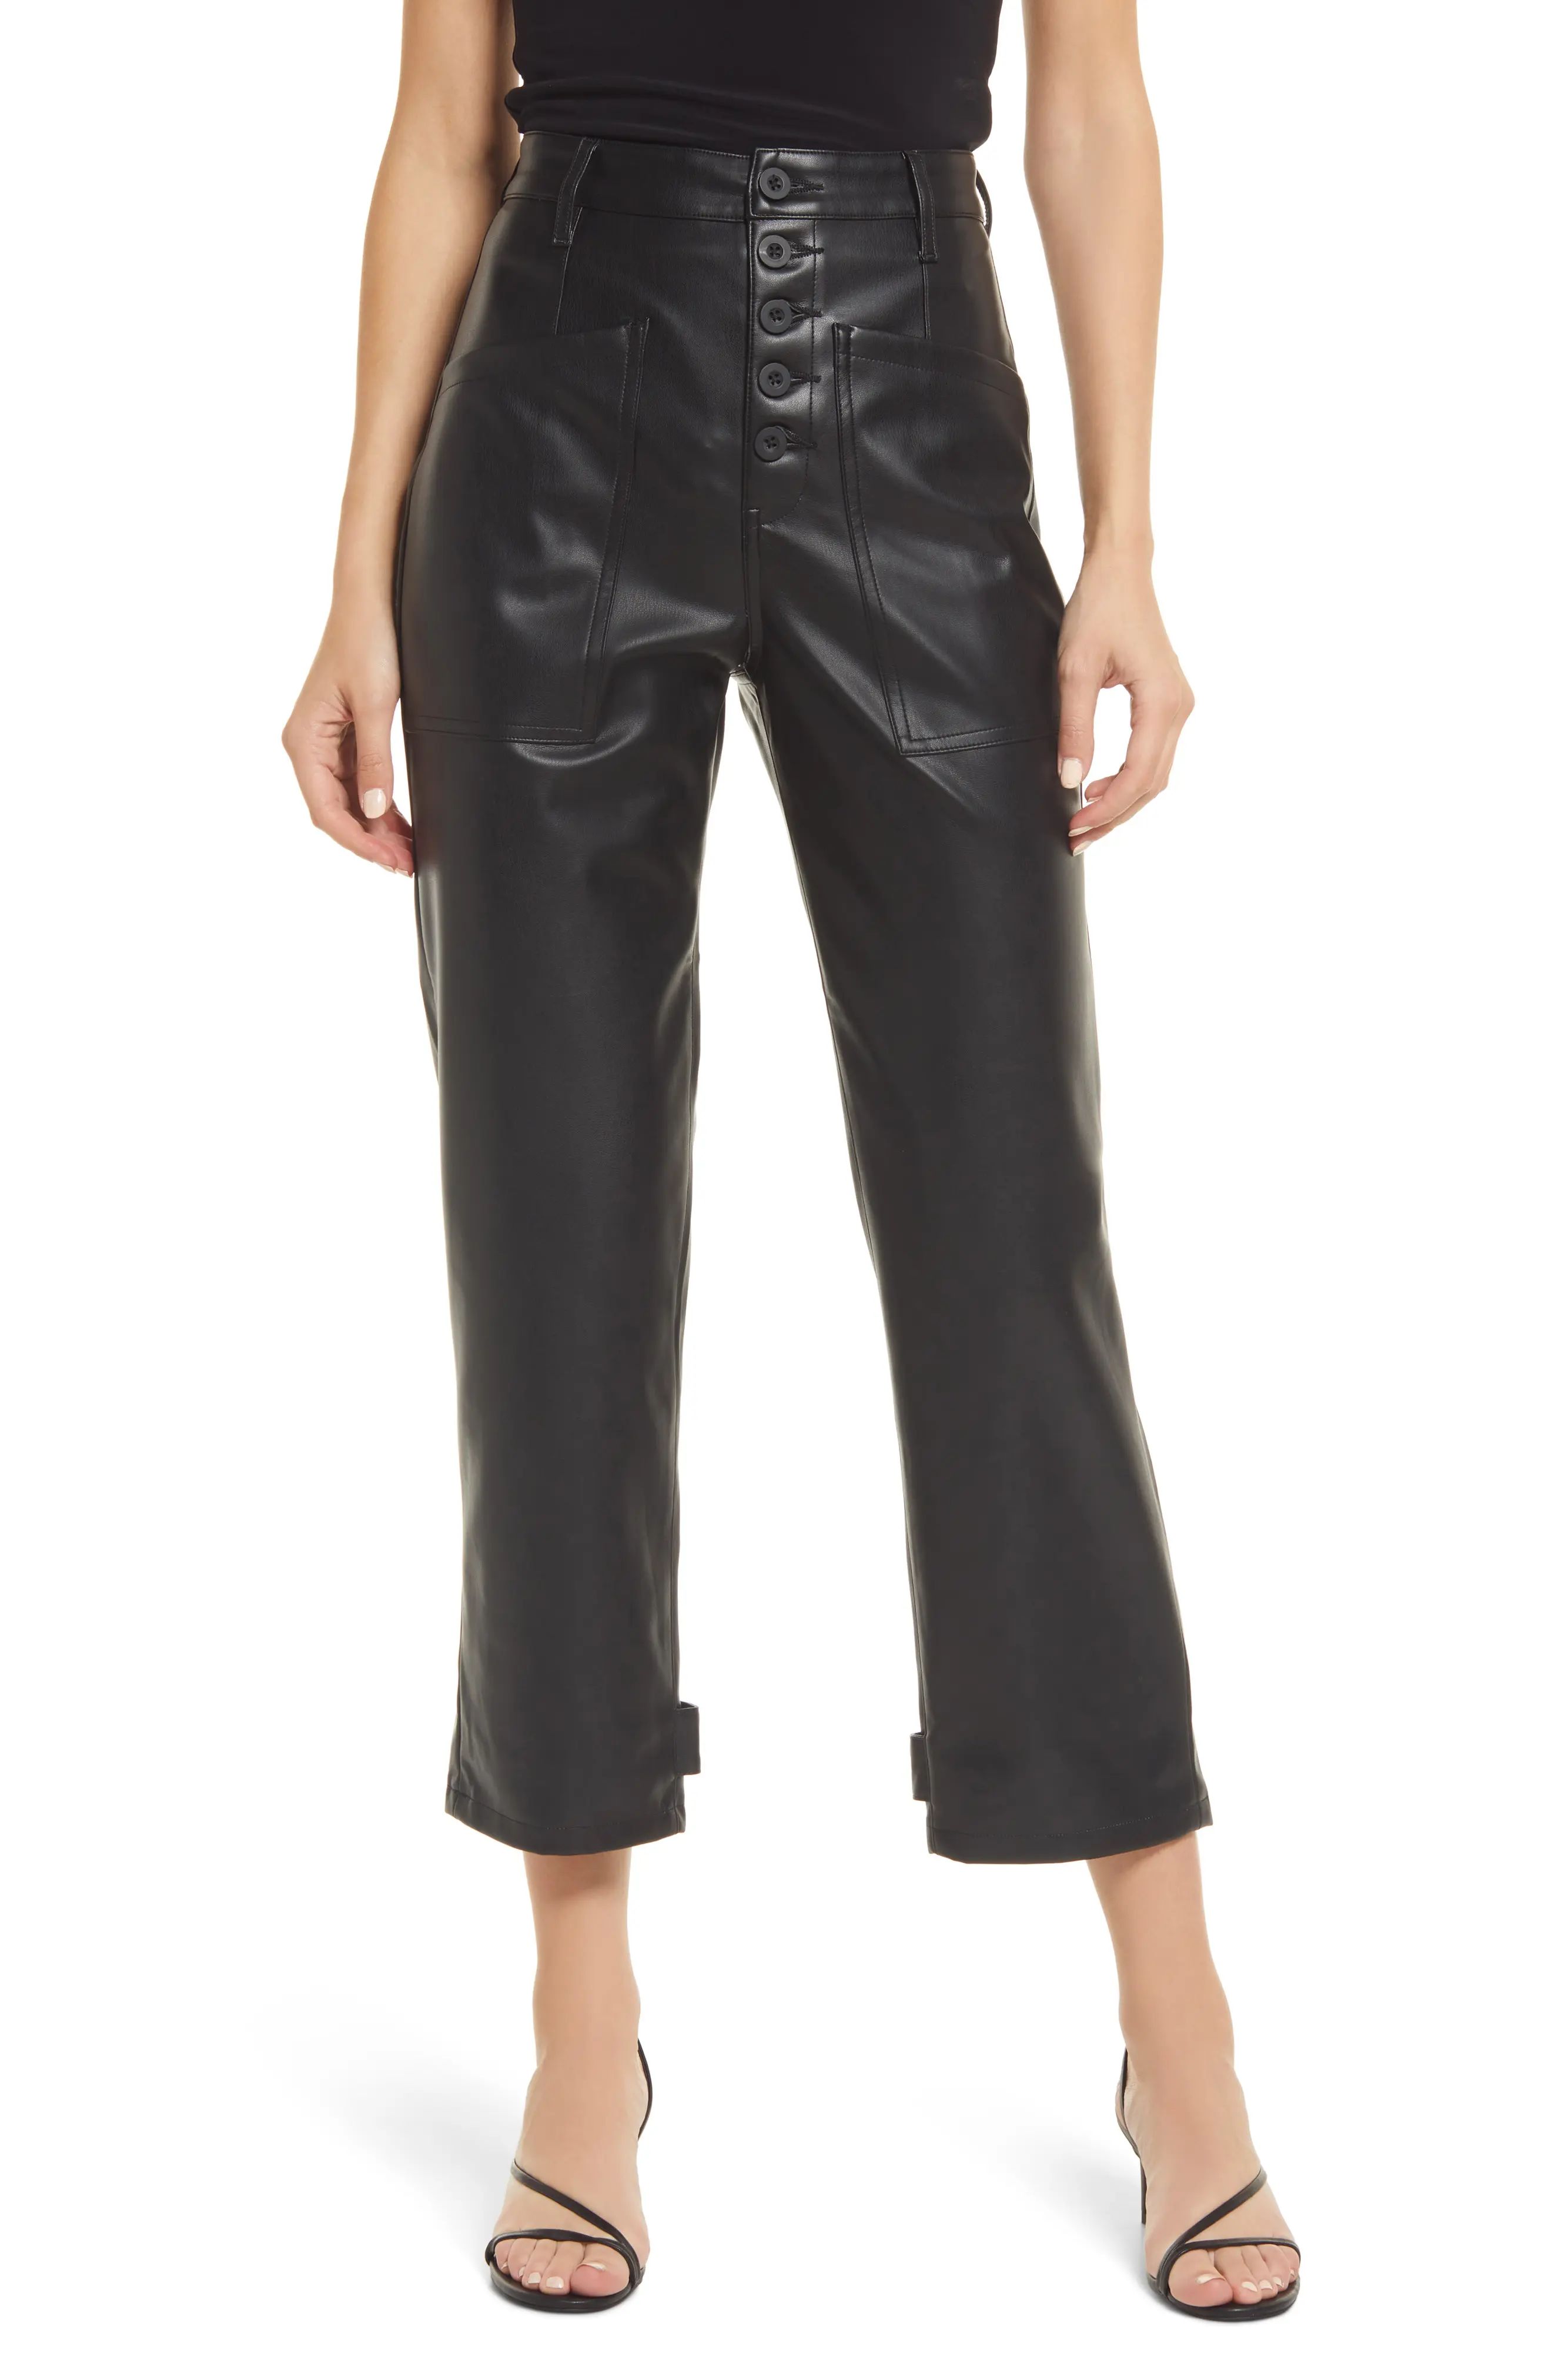 Pistola Tammy High Waist Button Fly Faux Leather Trousers, Size 26 in Slate Black at Nordstrom | Nordstrom